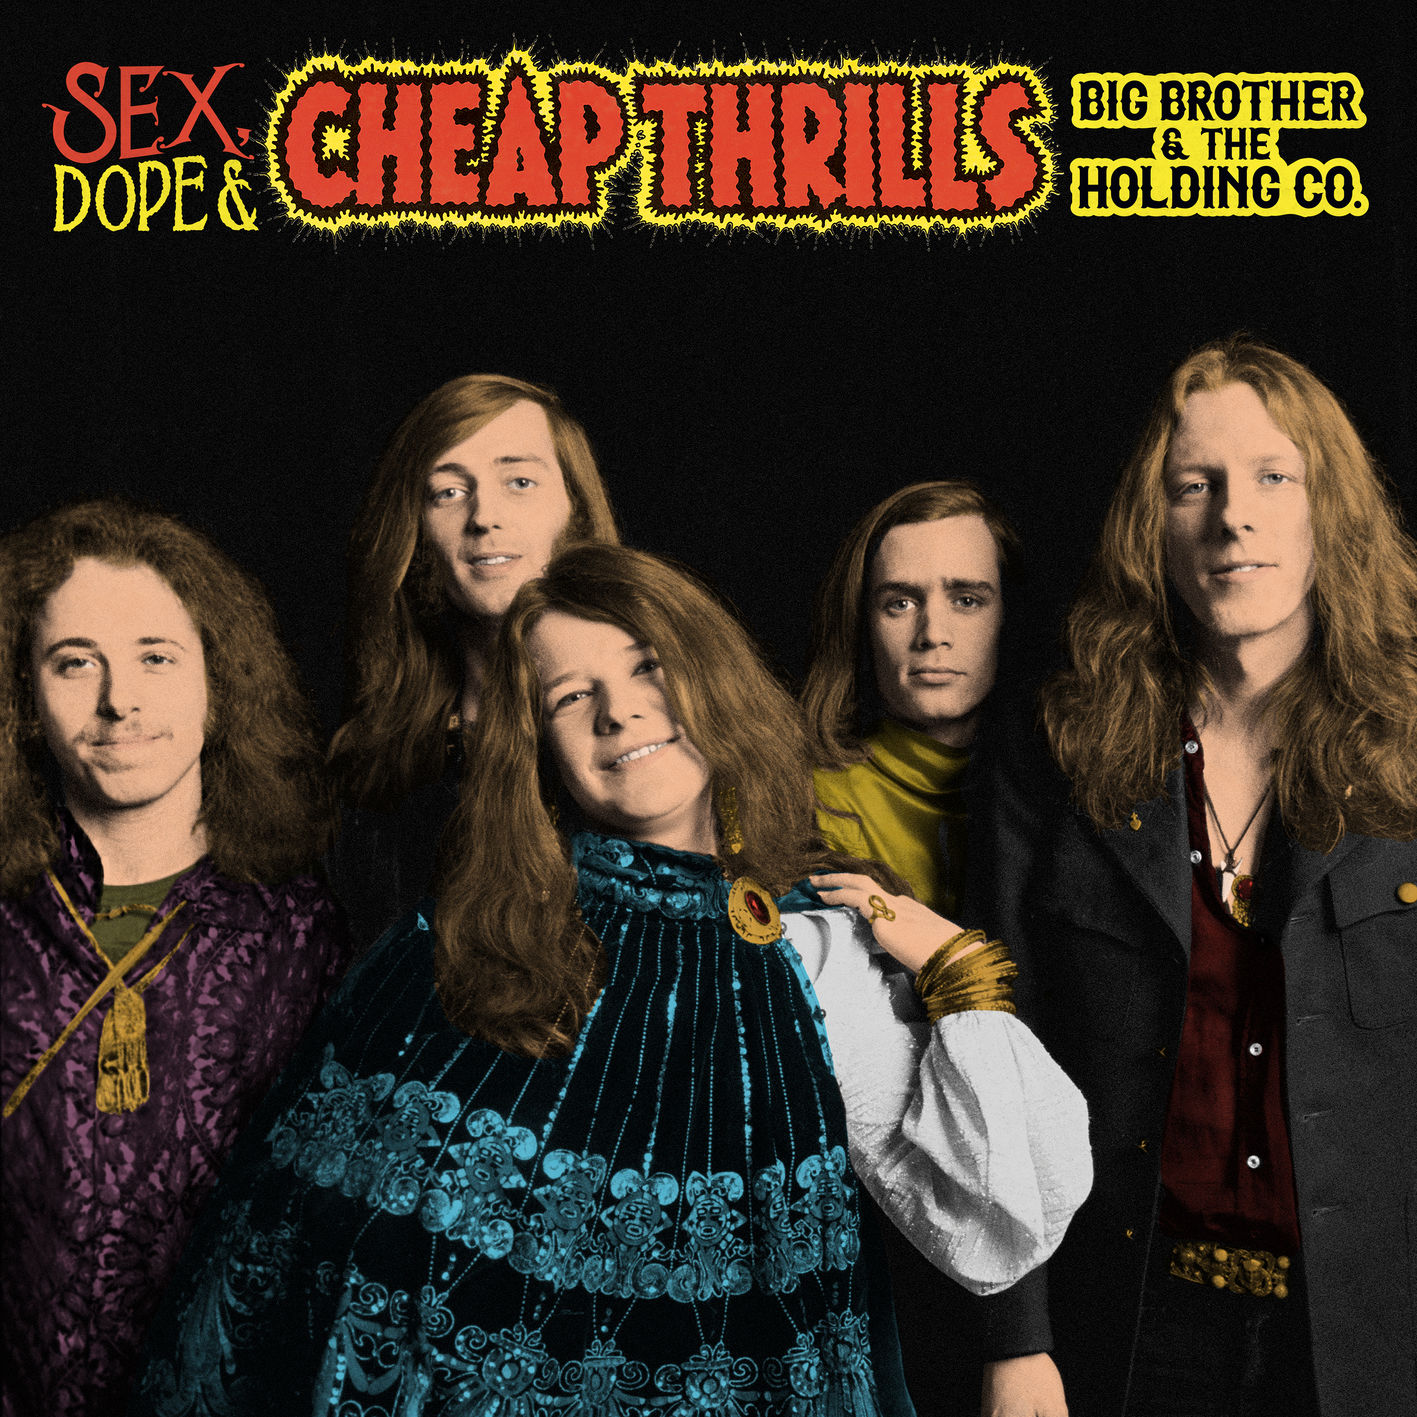 Big Brother & The Holding Company - Sex, Dope & Cheap Thrills [2018] cd02 24-88.2